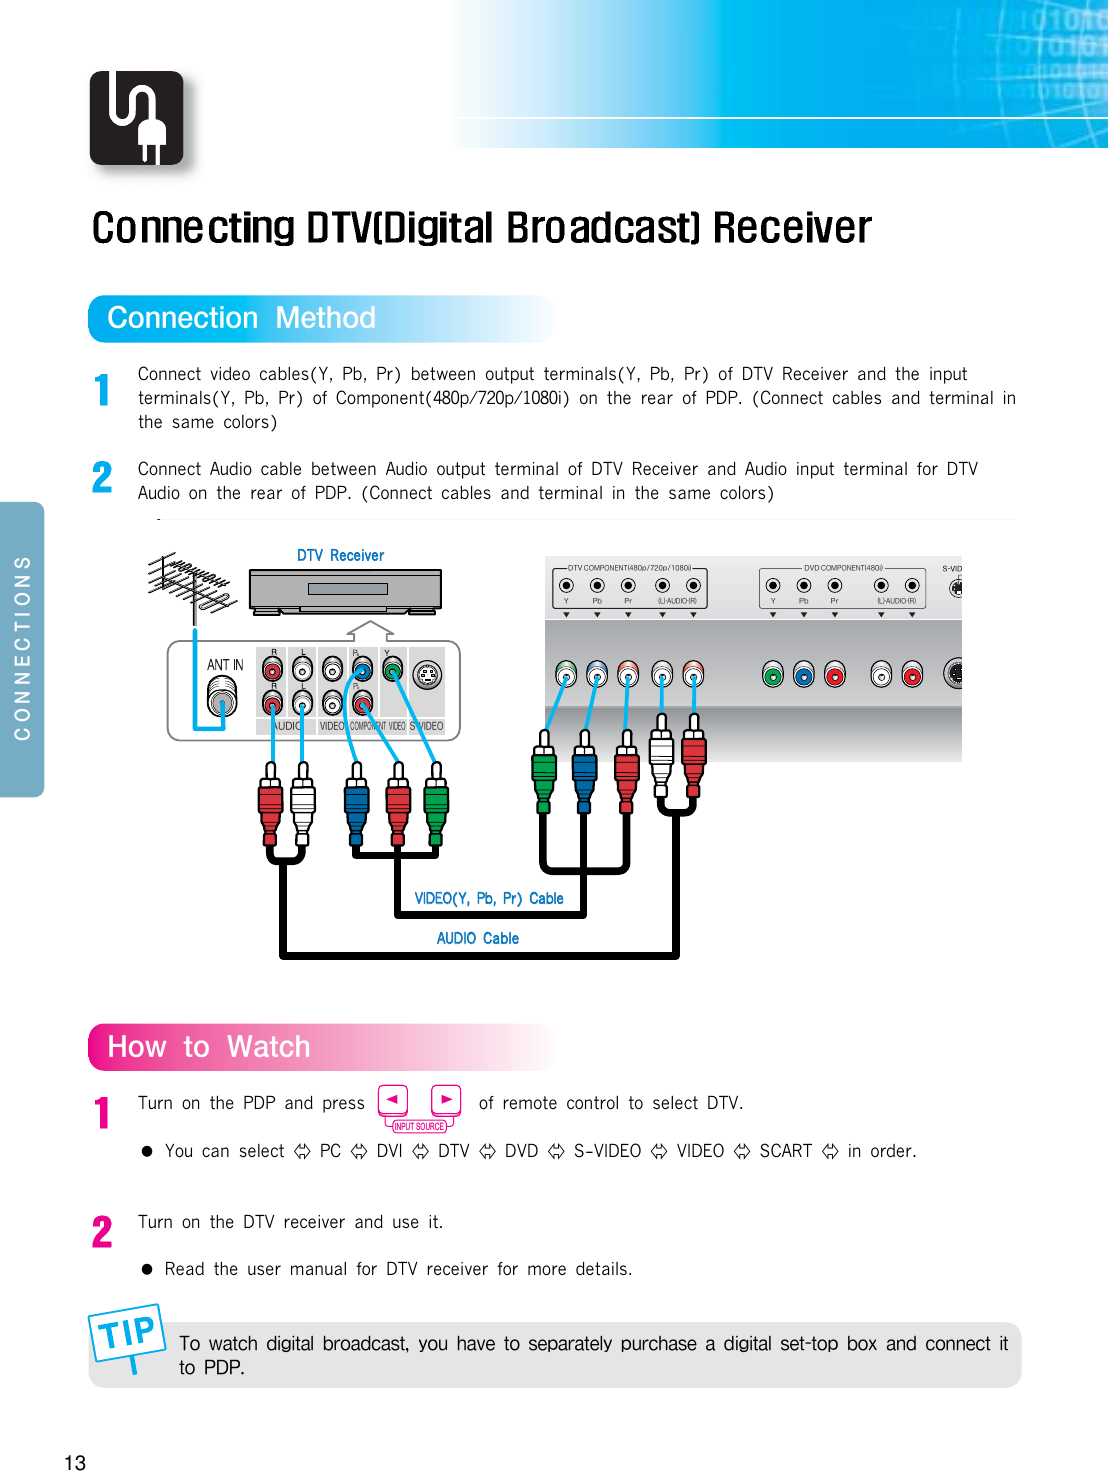 13+766-+&lt;176;+WVVMK\QWV5M\PWLConnect video cables(Y, Pb, Pr) between output terminals(Y, Pb, Pr) of DTV Receiver and the inputterminals(Y, Pb, Pr) of Component(480p/720p/1080i) on the rear of PDP. (Connect cables and terminal inthe same colors) Connect Audio cable between Audio output terminal of DTV Receiver and Audio input terminal for DTVAudio on the rear of PDP. (Connect cables and terminal in the same colors) 0W_\W?I\KPTurn on the PDP and press             of remote control to select DTV.  ●You can select  PC  DVI  DTV  DVD  S-VIDEO  VIDEO  SCART  in order. Turn on the DTV receiver and use it. ●Read the user manual for DTV receiver for more details. &lt;W_I\KPLQOQ\ITJZWILKI[\aW]PI^M\W[MXIZI\MTaX]ZKPI[MILQOQ\IT[M\\WXJW`IVLKWVVMK\Q\\W8,8INPUT SOURCESOURCEMODEPIP ON/OFFSWAPSIZEPOSITION:/*8+ၮഎ@/):/*,&lt;&gt;ၮഎ XX Q ๗ಀ໏๗༺ဧ:;,&gt;1ၮഎ,1/1&lt;)4 ,;=*ၮഎၮഎ ᆖഎ ႺၗໜဨA8J8Z 8JA8Z ࿱ື,&lt;&gt;+75876-6&lt; XX Q ,&gt;,+75876-6&lt; Q4)=,17: 4)=,17:)=,17&gt;1,-7 ;&gt;1,-7+75876-6&lt;&gt;1,-7AAUUDDIIOOCCaabblleeVVIIDDEEOO((YY,,  PPbb,,  PPrr))  CCaabblleeDDTTVV  RReecceeiivveerr